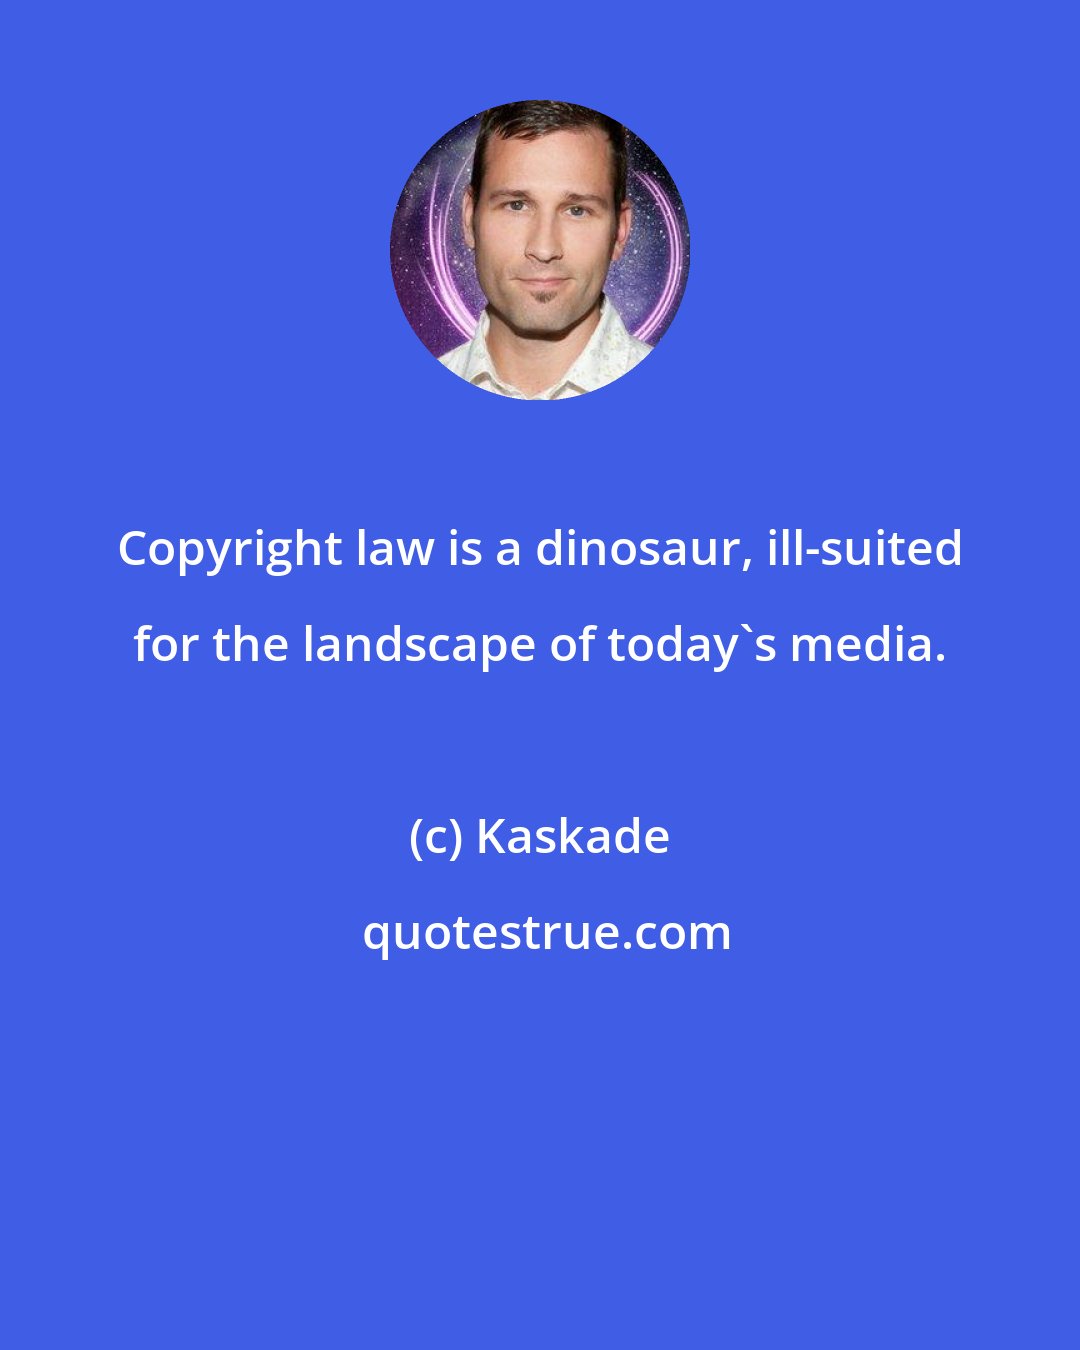 Kaskade: Copyright law is a dinosaur, ill-suited for the landscape of today's media.